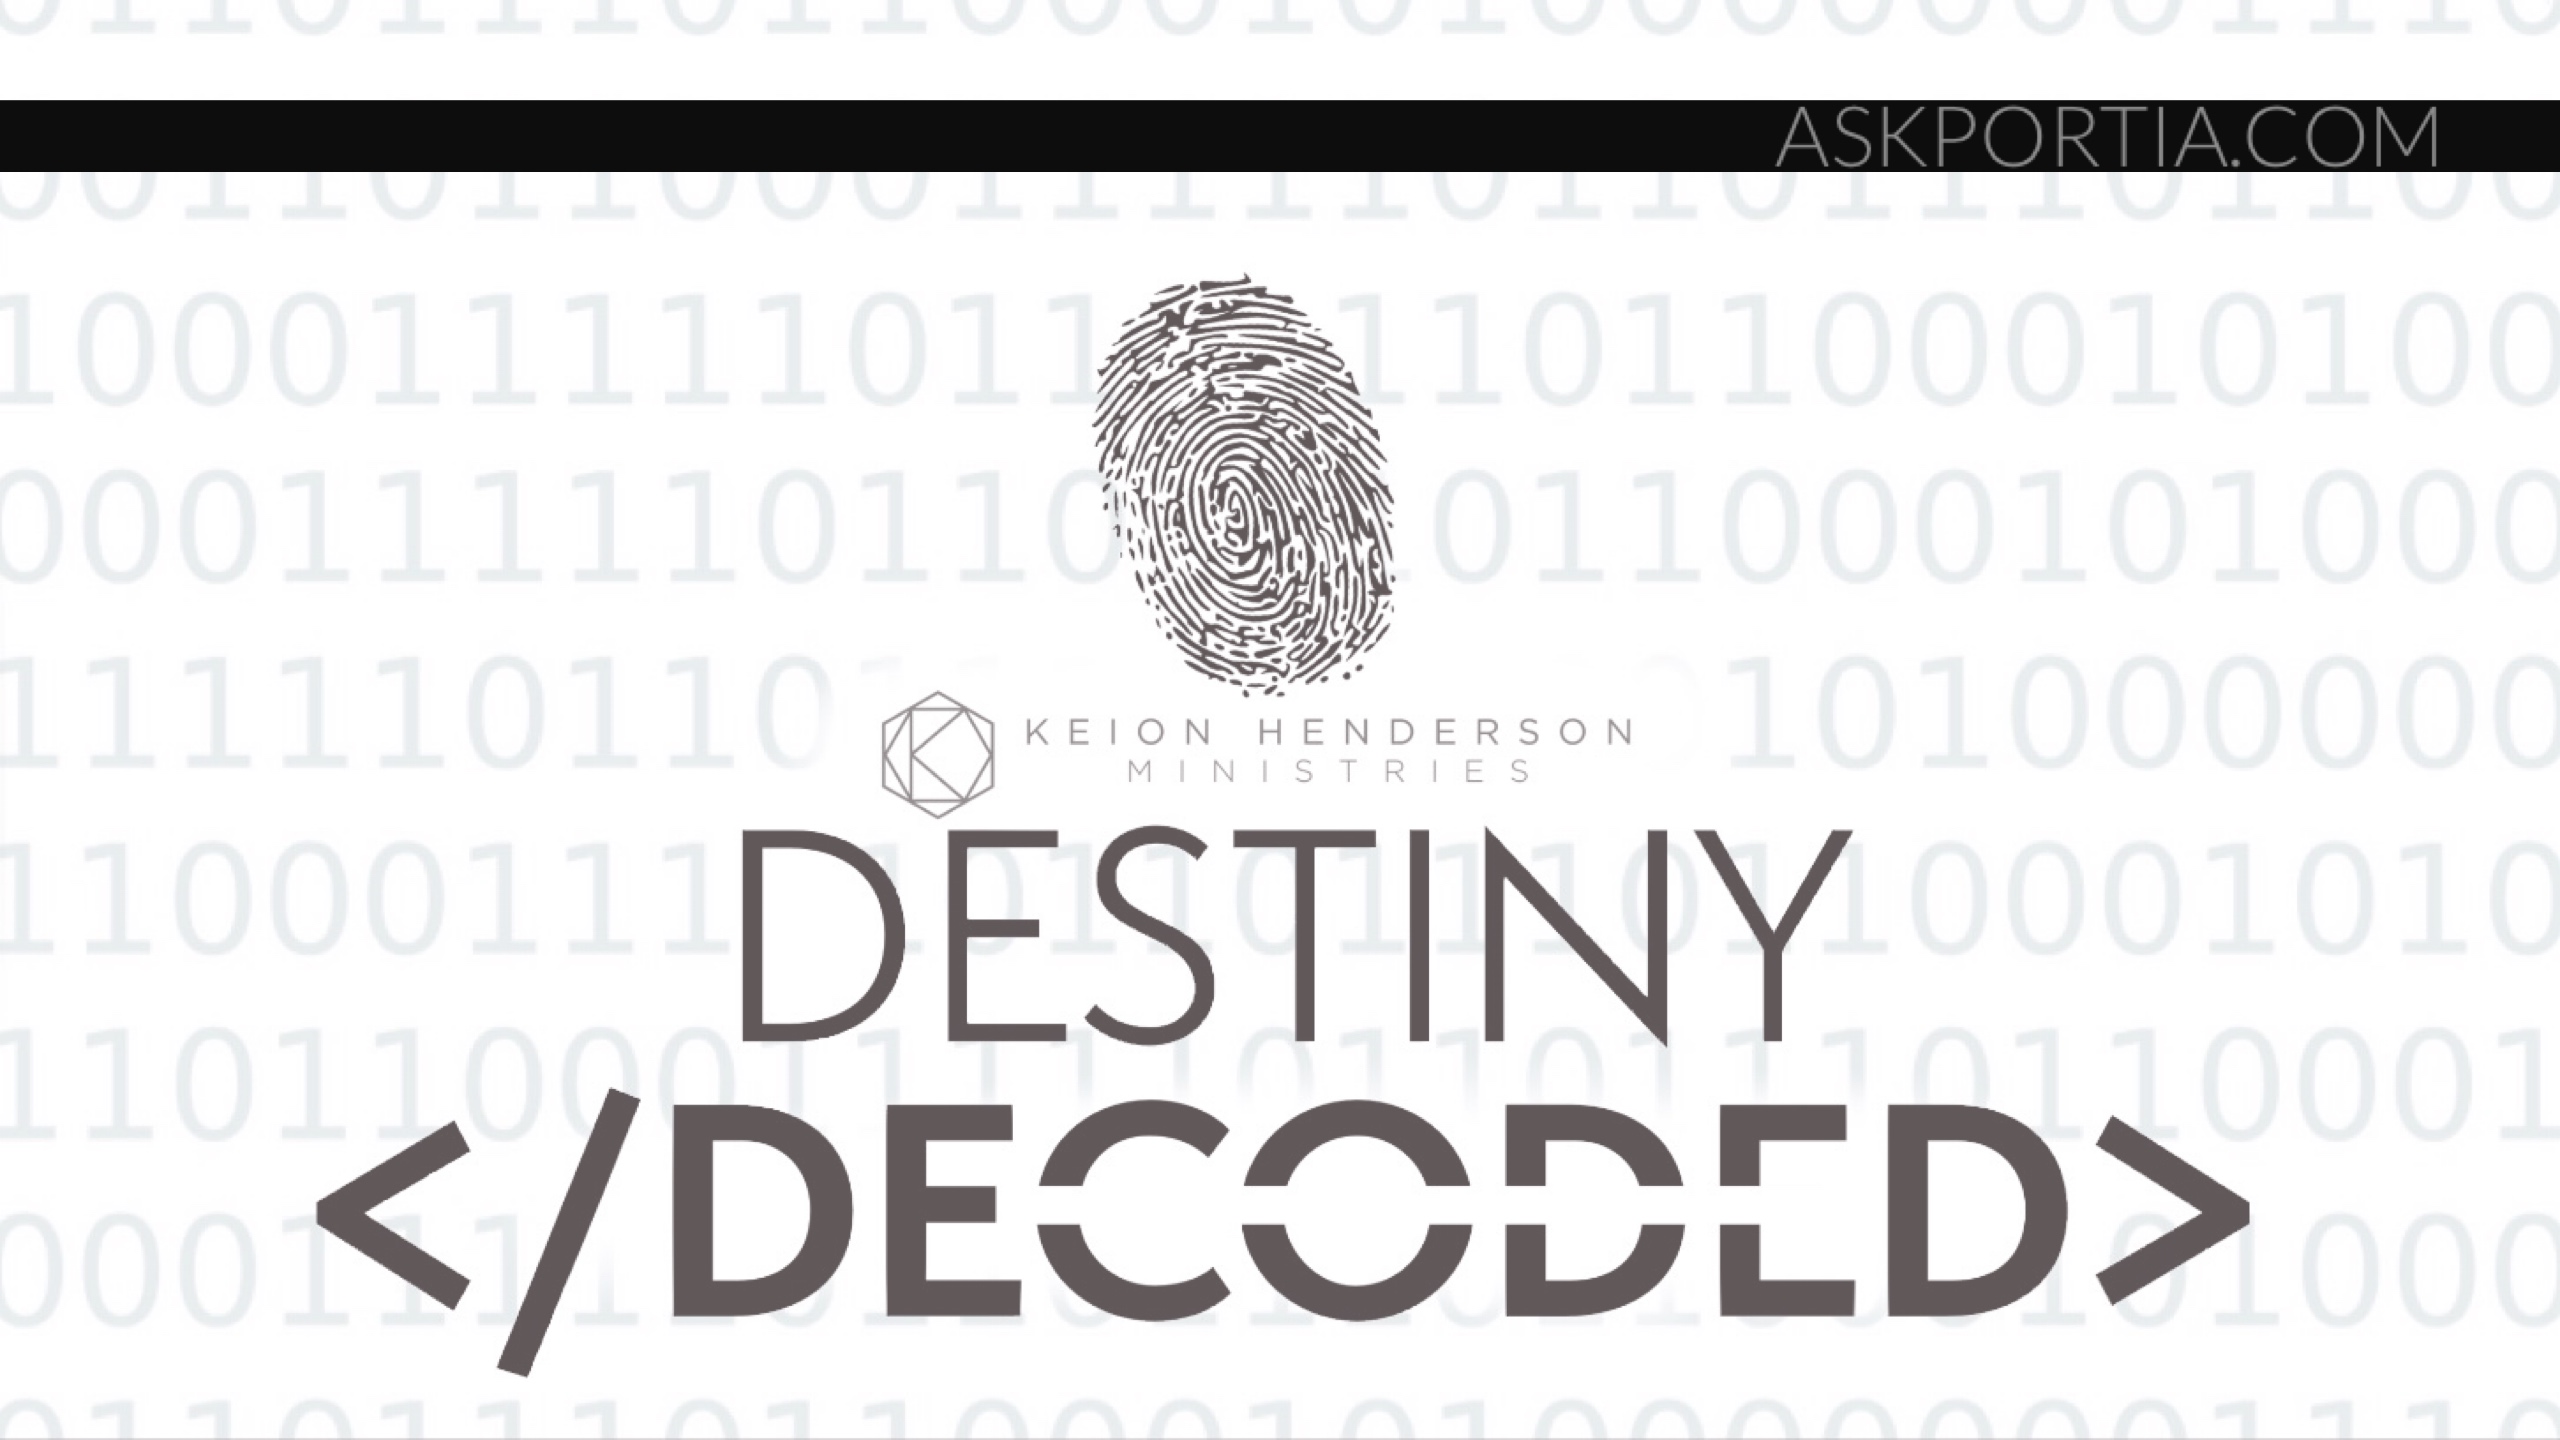 Decoding Your OWN Destiny, Can You Do It? Destiny Decoded